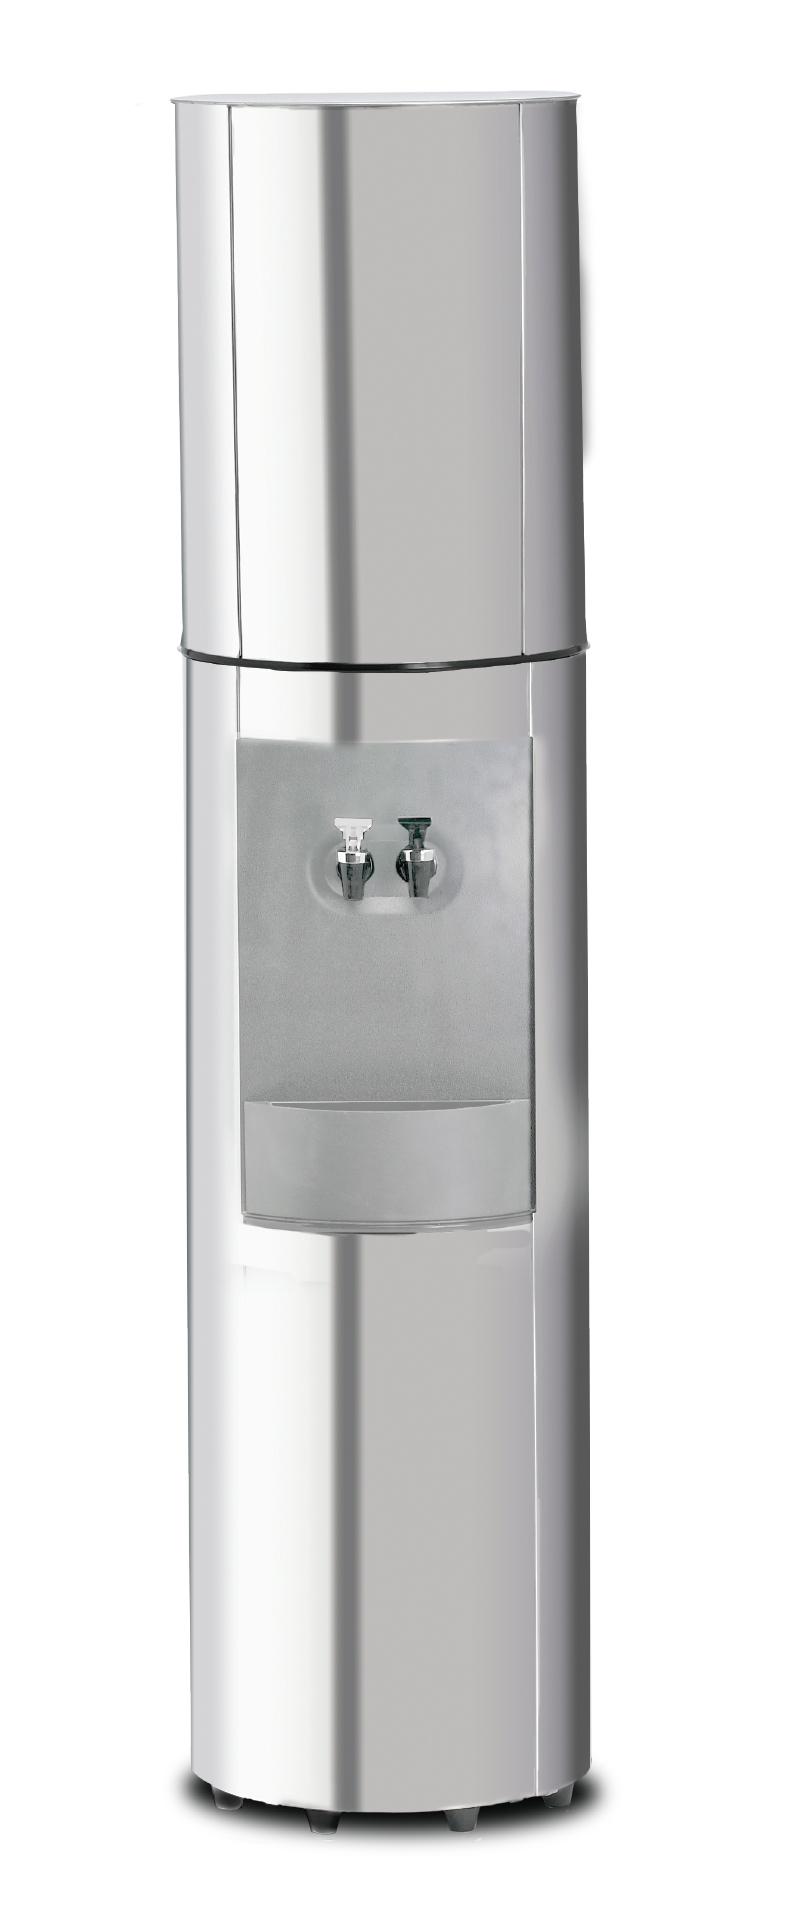 Triple S2 Stainless Steel Water Cooler with Room Temp & Cold Water